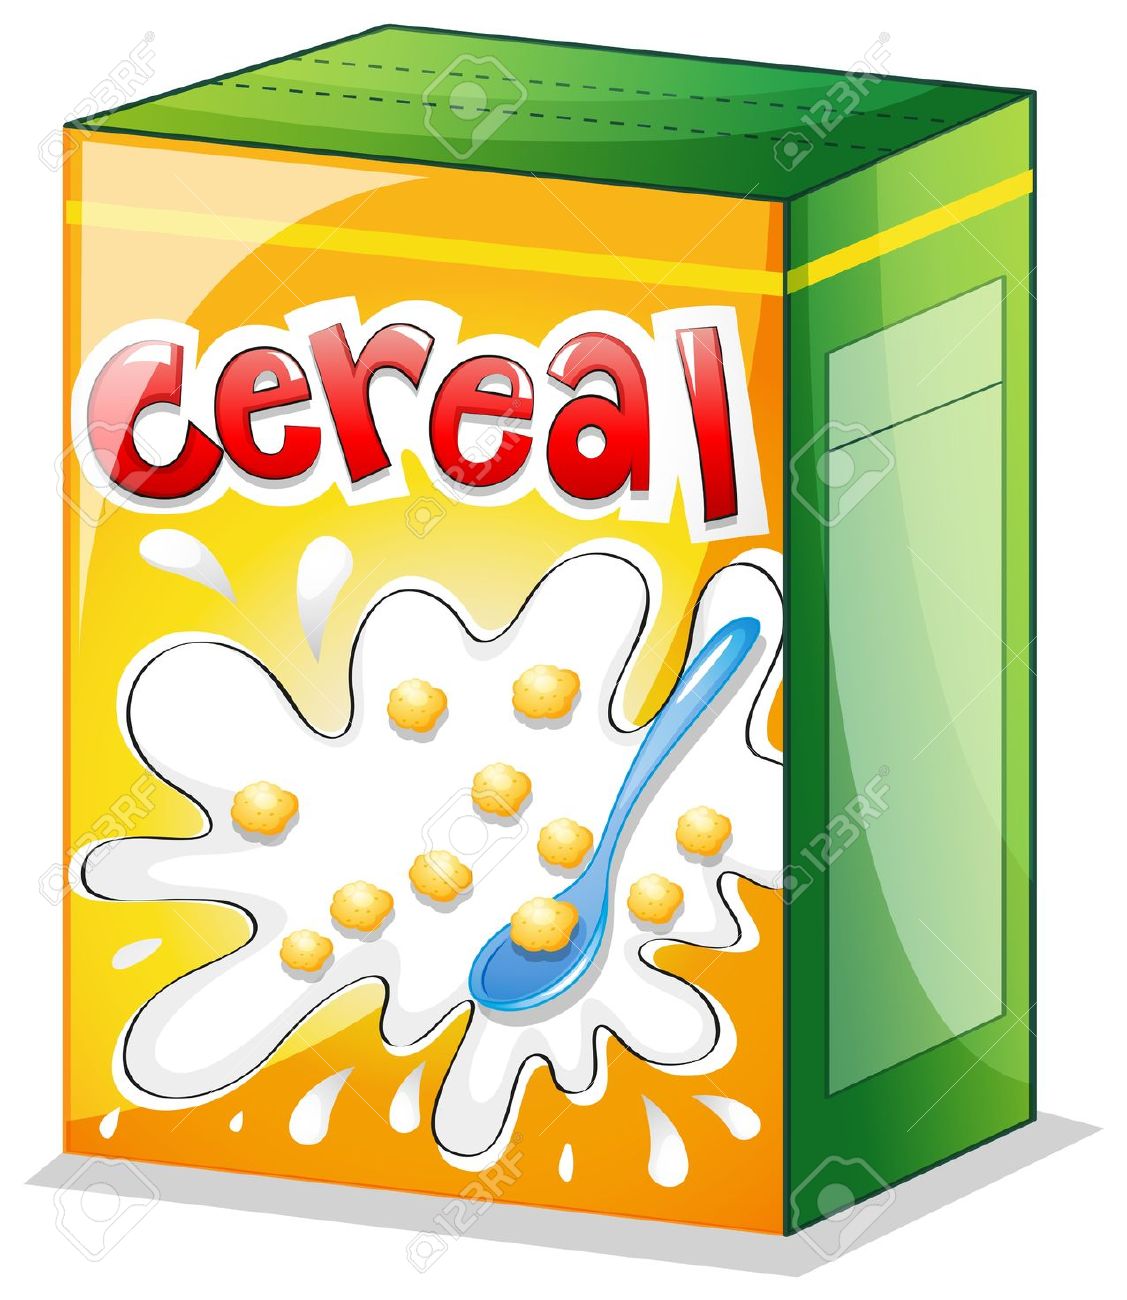 cereal box: Illustration of a .